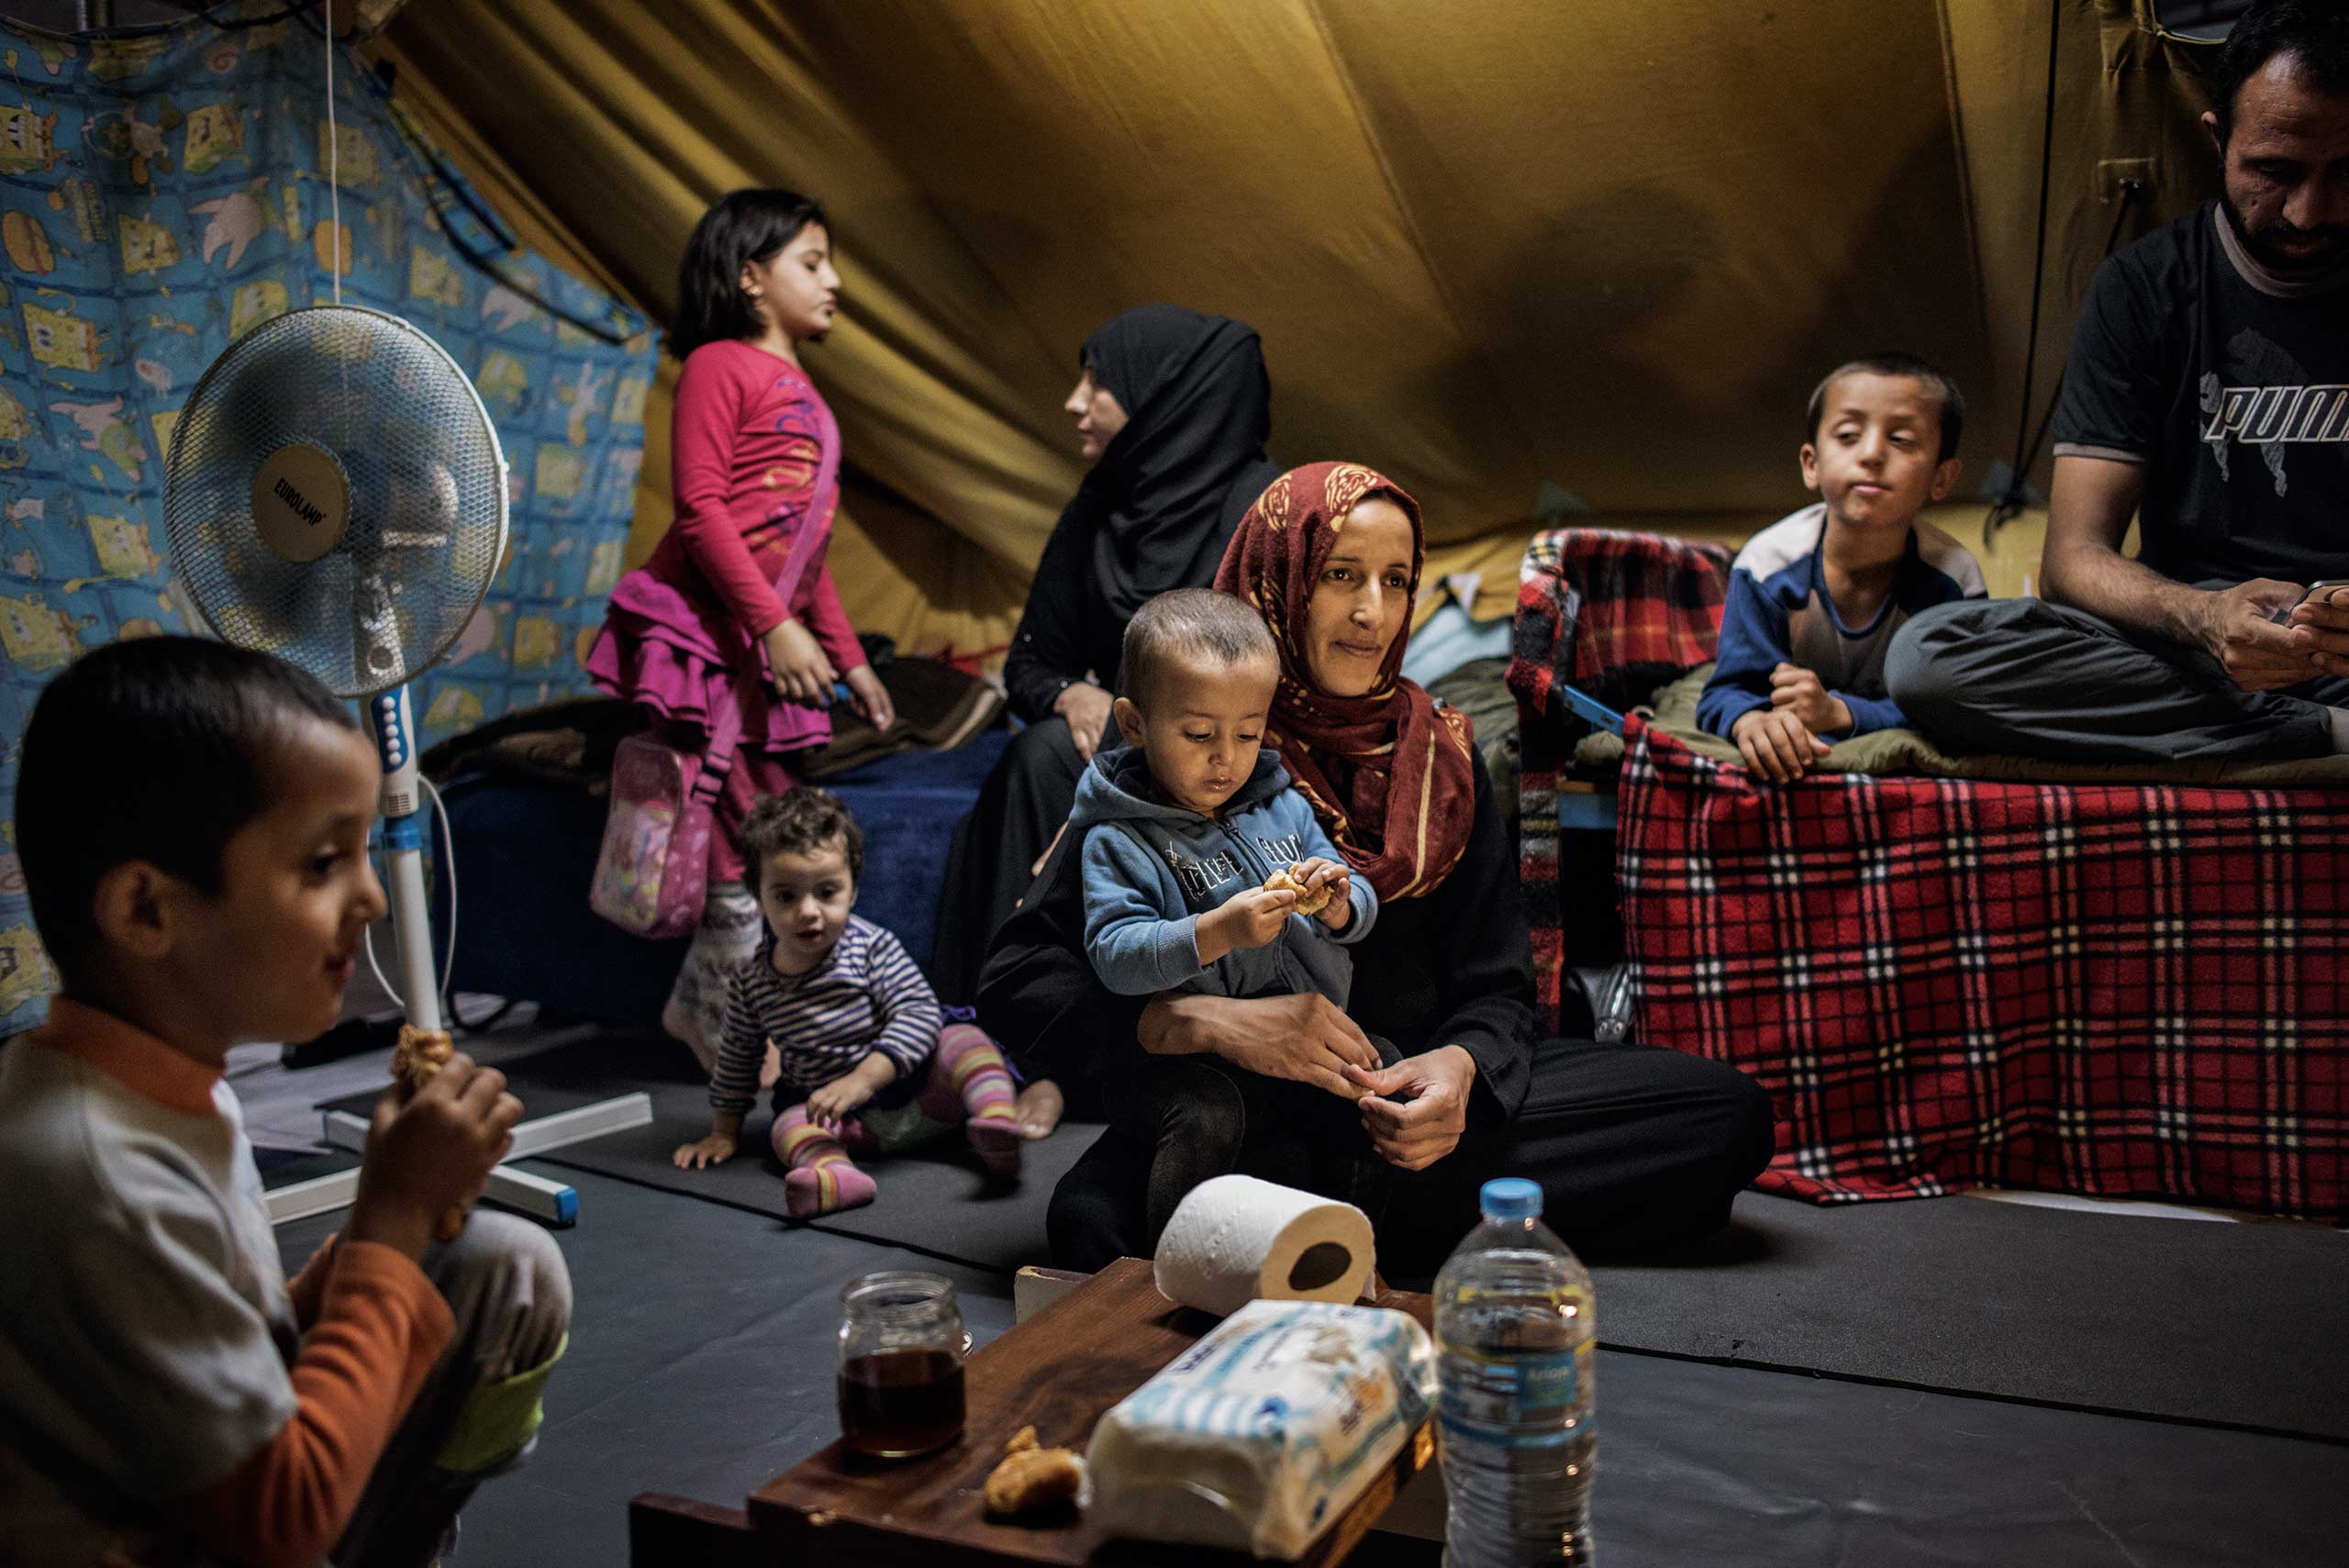 23-year-old Illham Alarabi, pregnant wither her fiifth son, sits with her children and husband, Minhel Alsaleh, 39, in their tent in the Oreokastro refugee camp in Thessaloniki, Greece, Sept. 8, 2016.